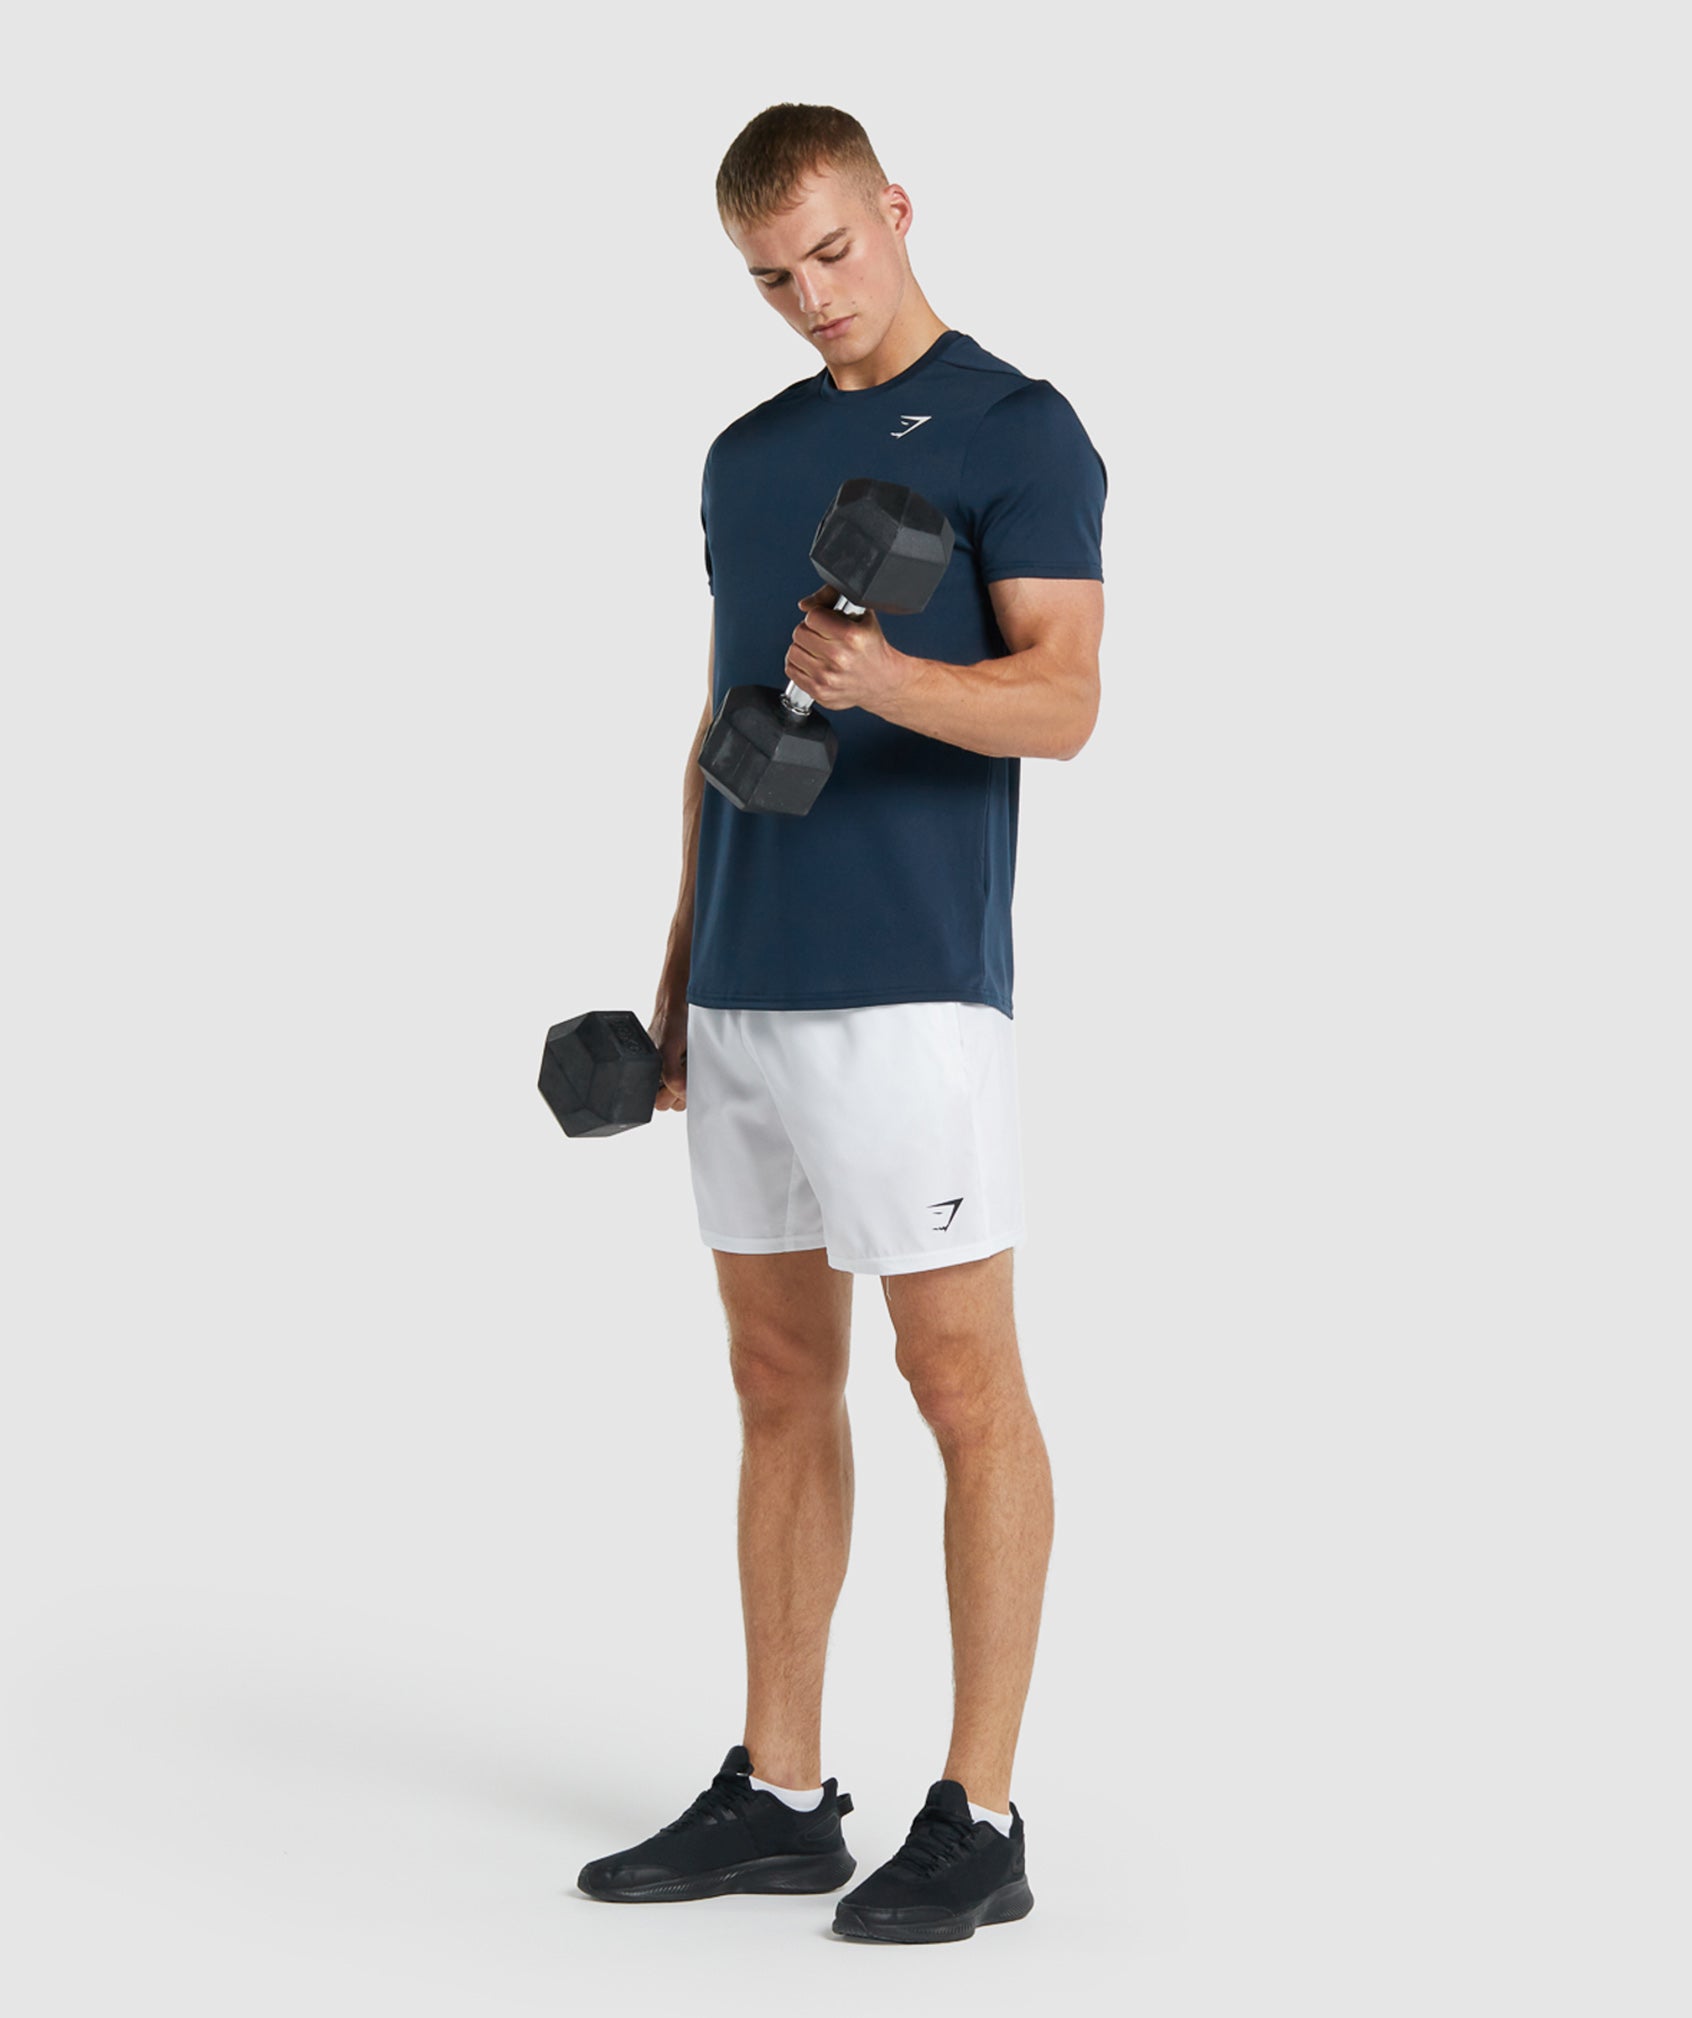 Arrival Regular Fit T-Shirt in Navy - view 4